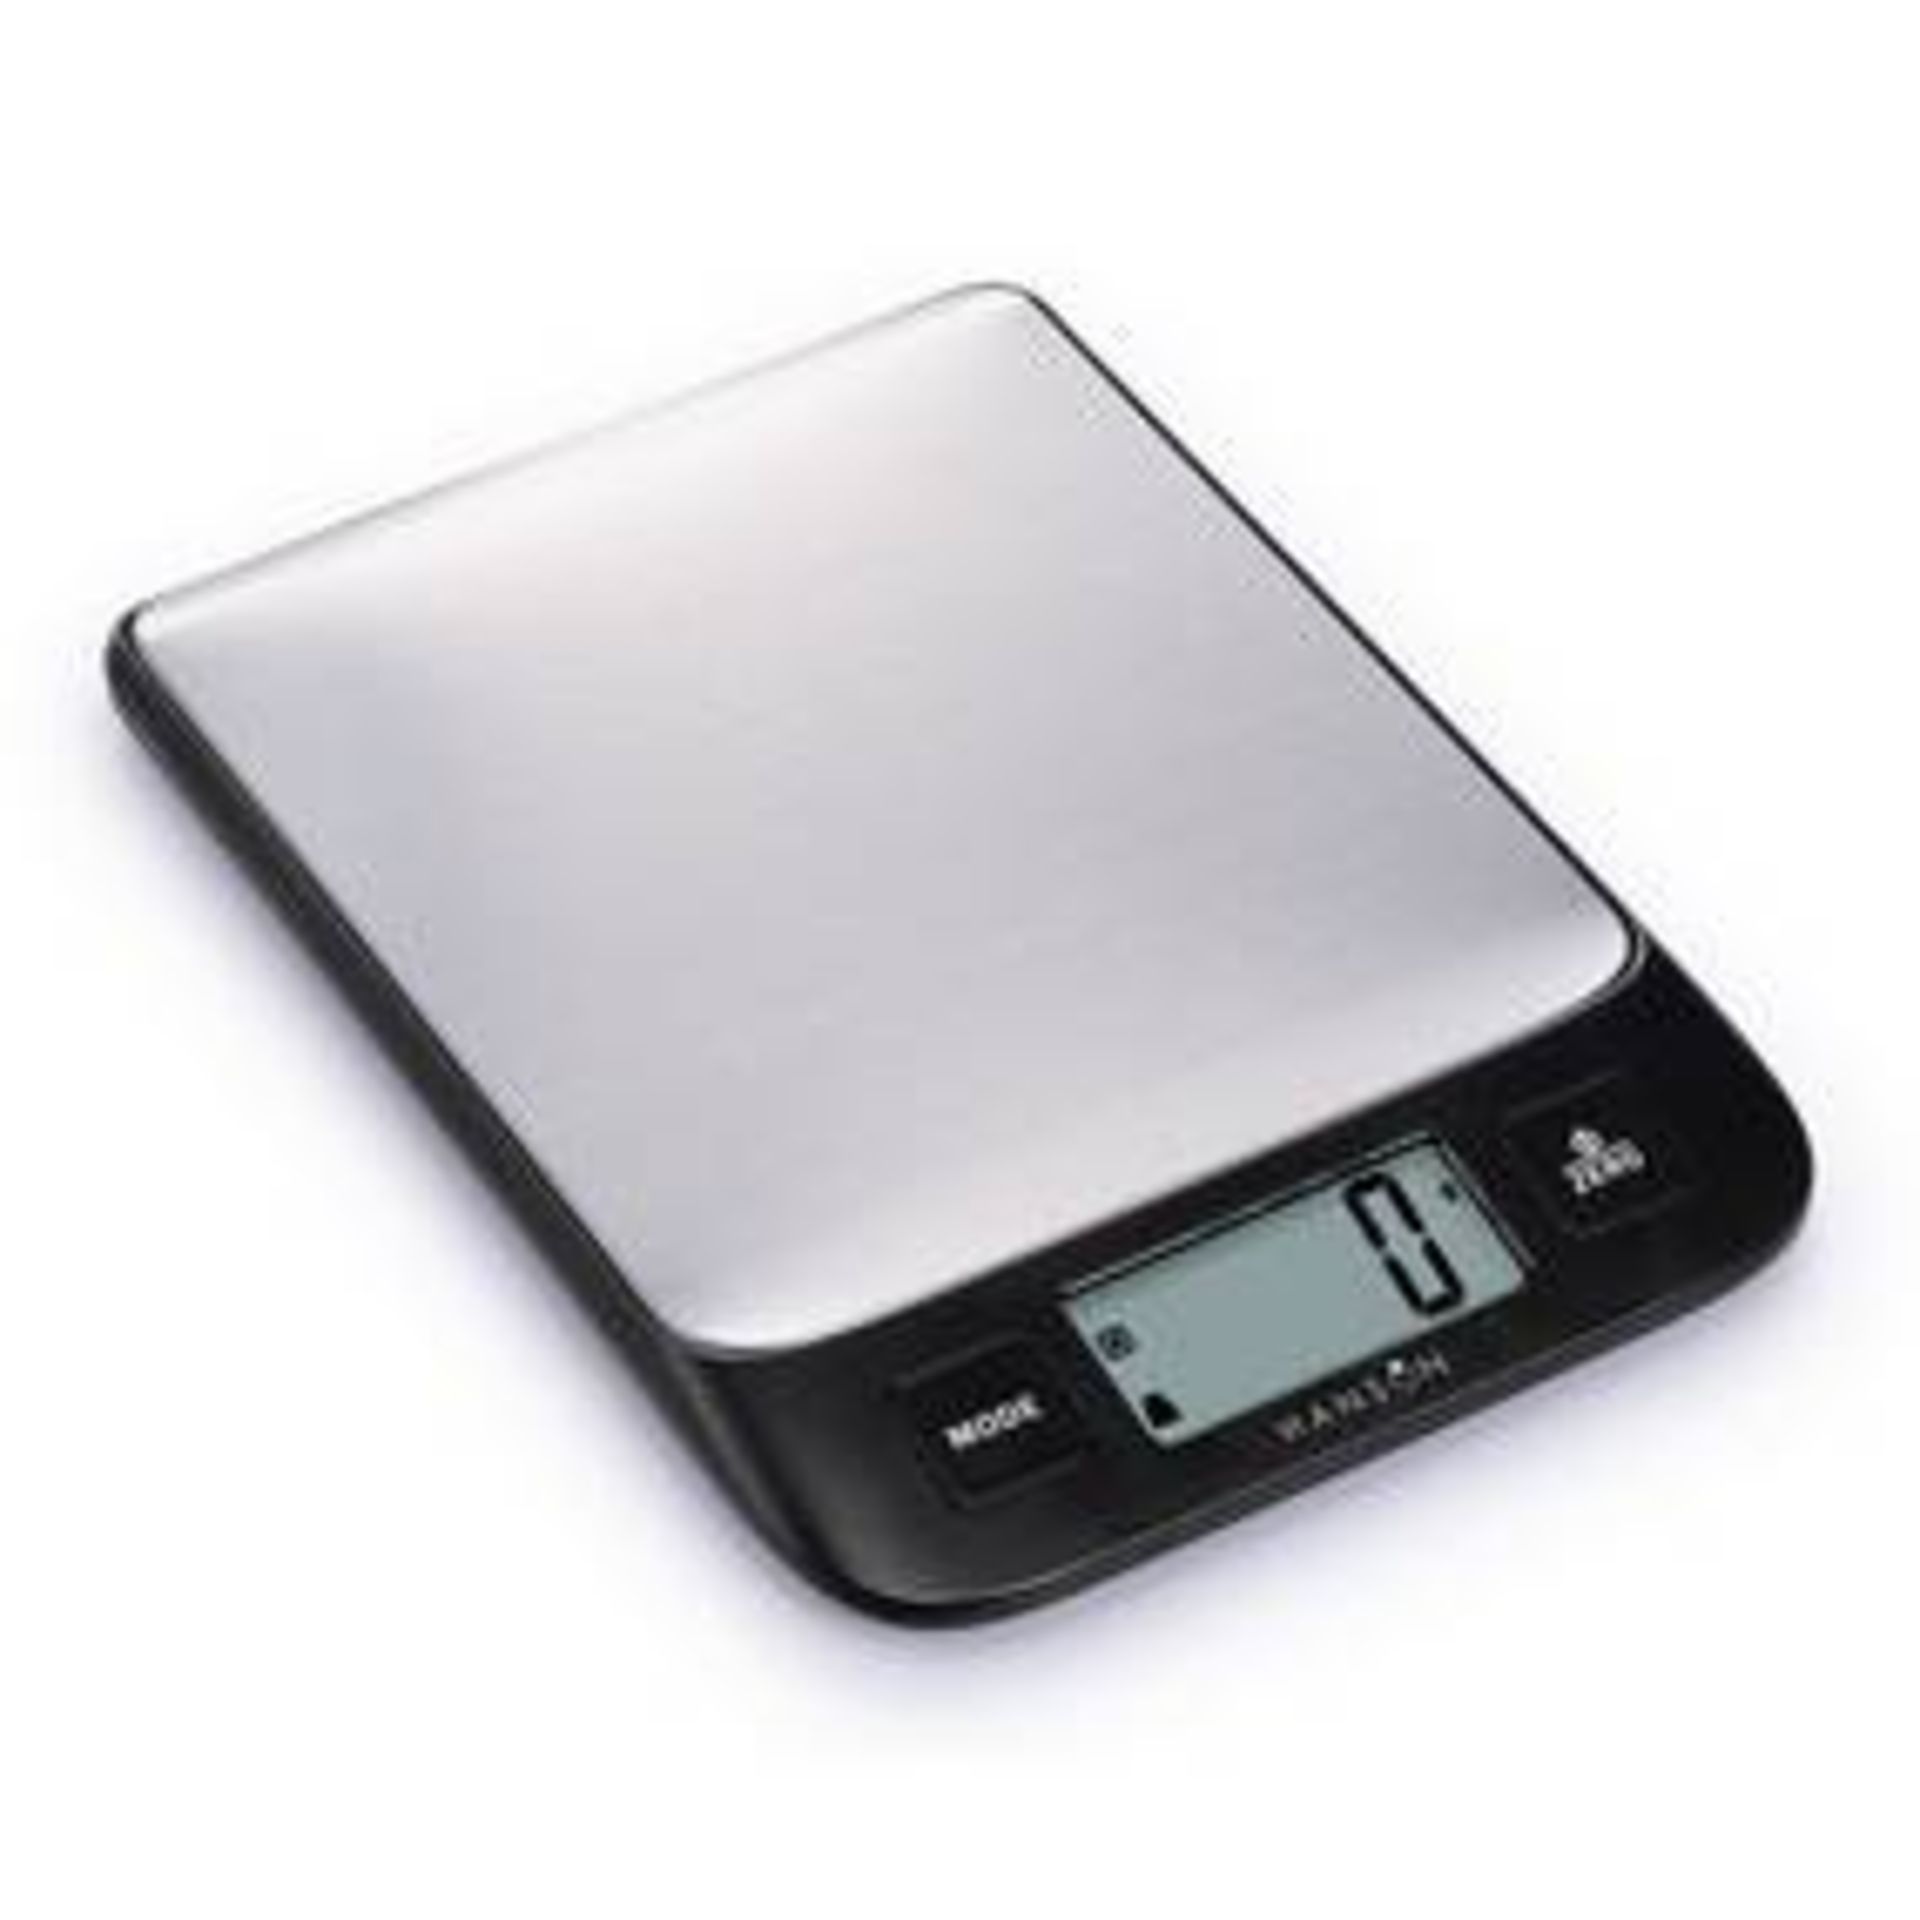 V Brand New Digital Kitchen Scales with Large LCD Display in lbs OZs and Grams (Styles may vary